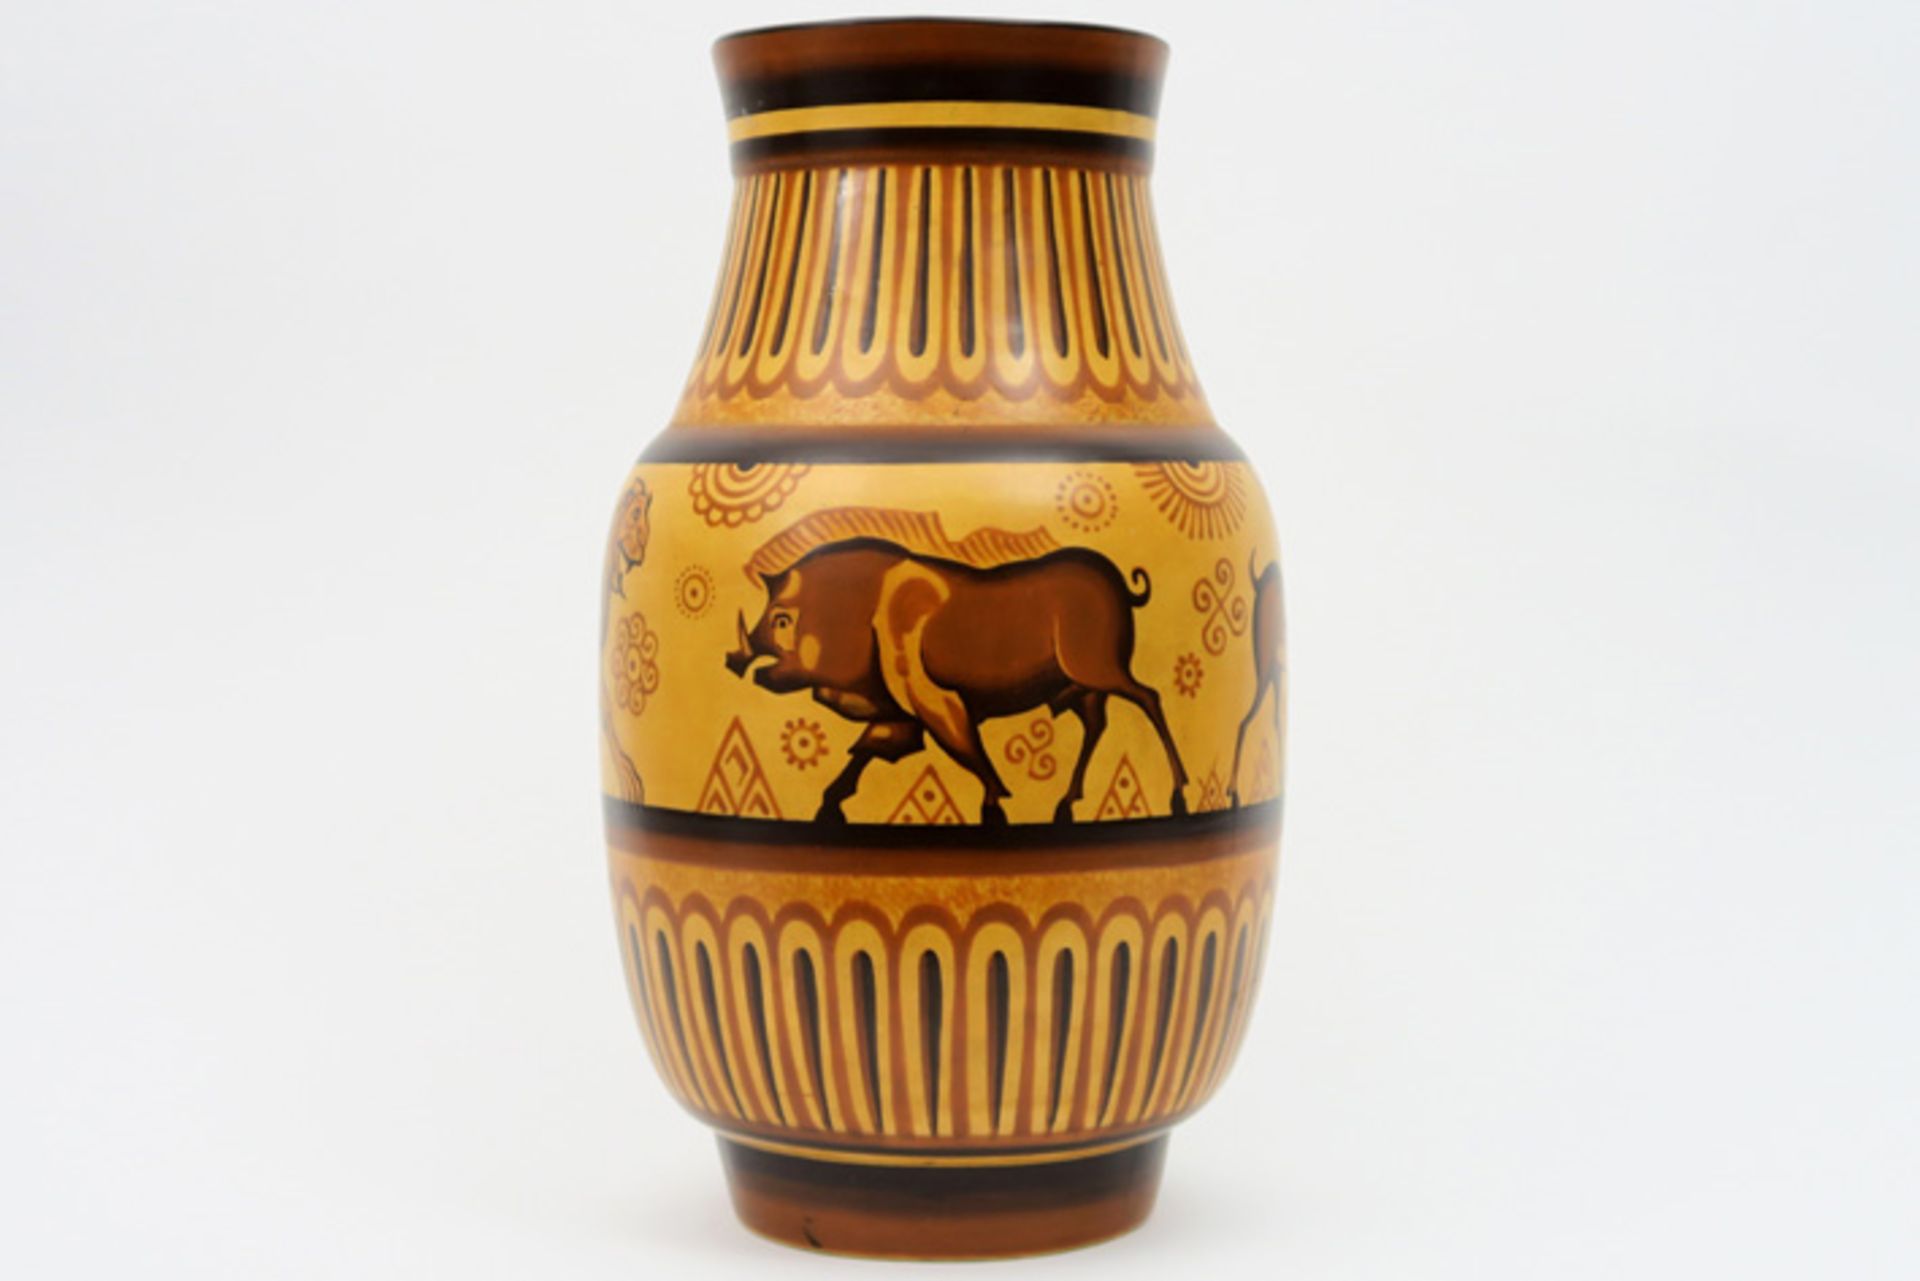 rare "Ch. Catteau" Art Deco-vase in 'Keramis' marked ceramic with a polychrome decor of lionesses